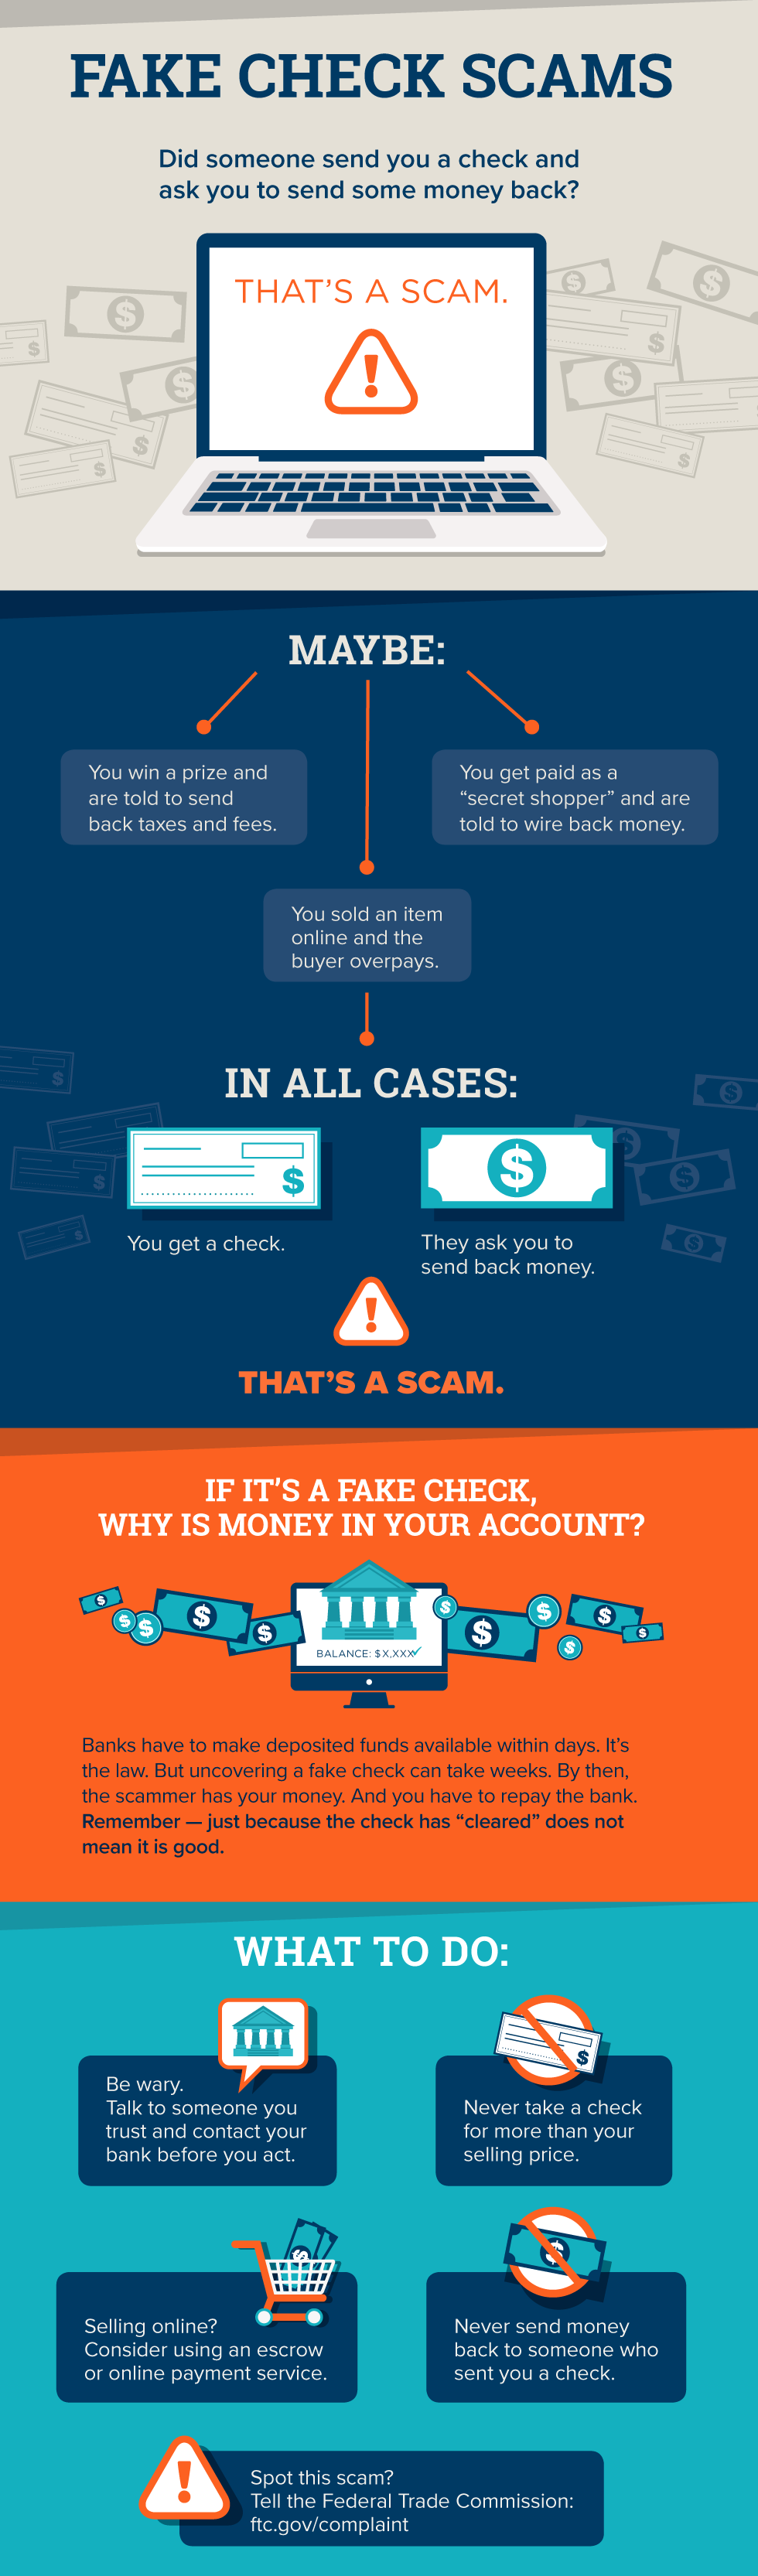 Fake Check Scam Infographic.